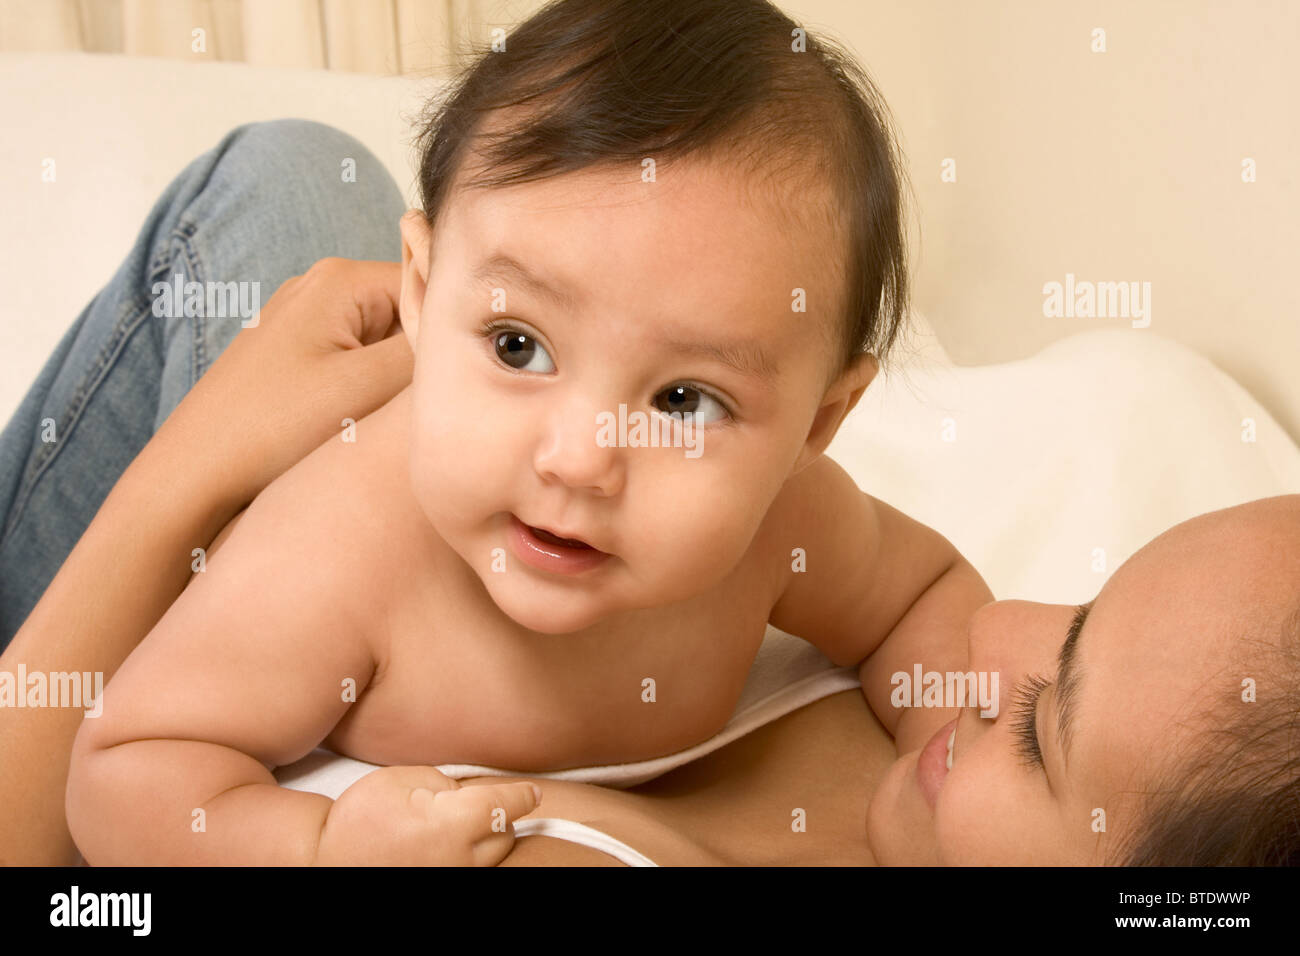 Mom lying down on bed and infant baby lies on her stomach Stock Photo